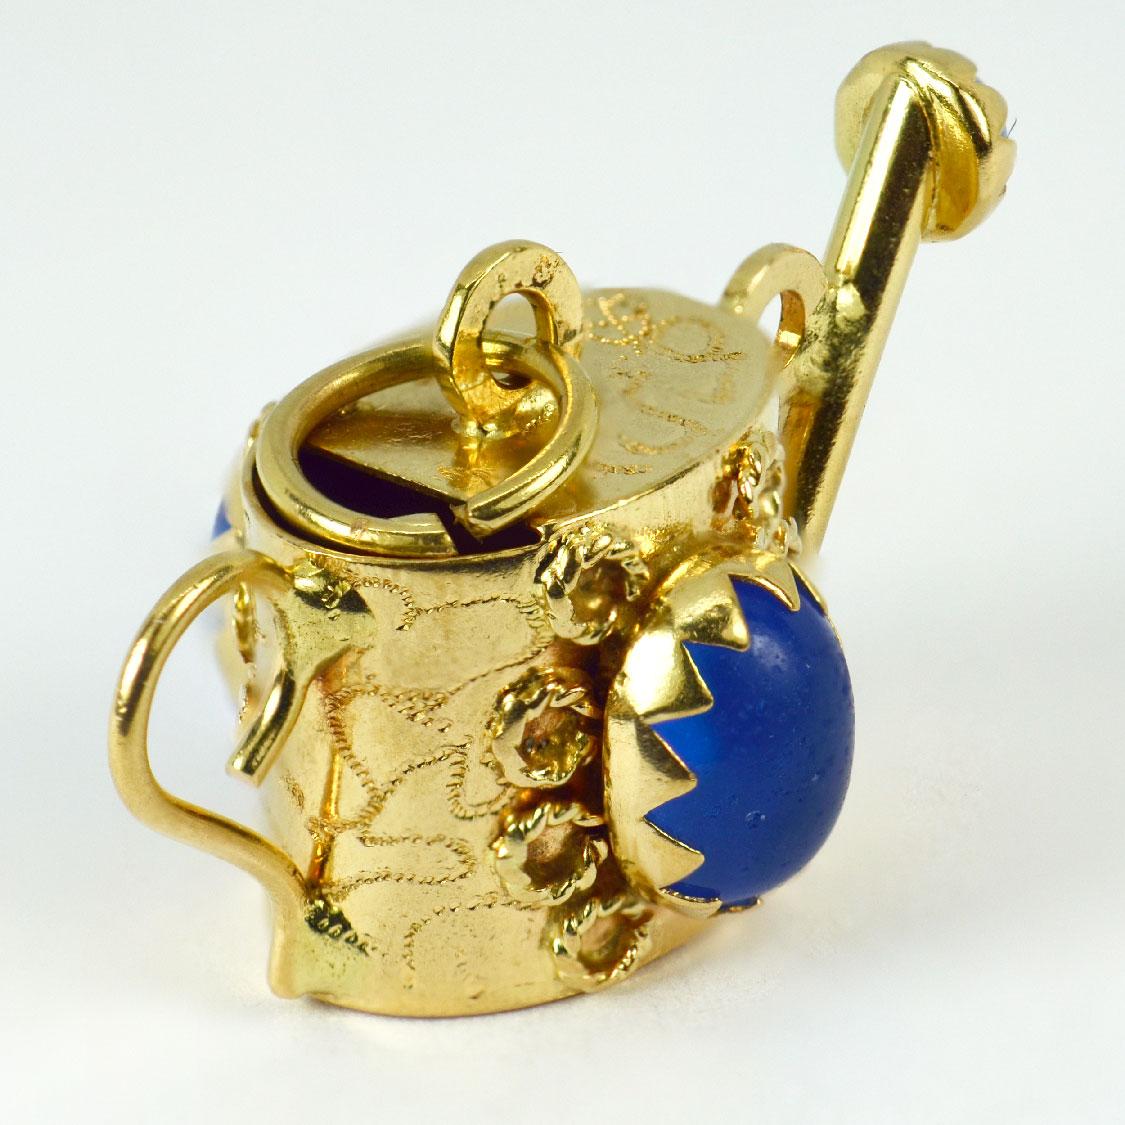 An 18 karat (18K) yellow gold charm pendant designed as a watering can set with blue paste. Stamped 750 for 18 karat gold and Italian manufacture.

Dimensions: 1.6 x 3 x 1.75 cm (not including jump ring)
Weight: 5.66 grams 
